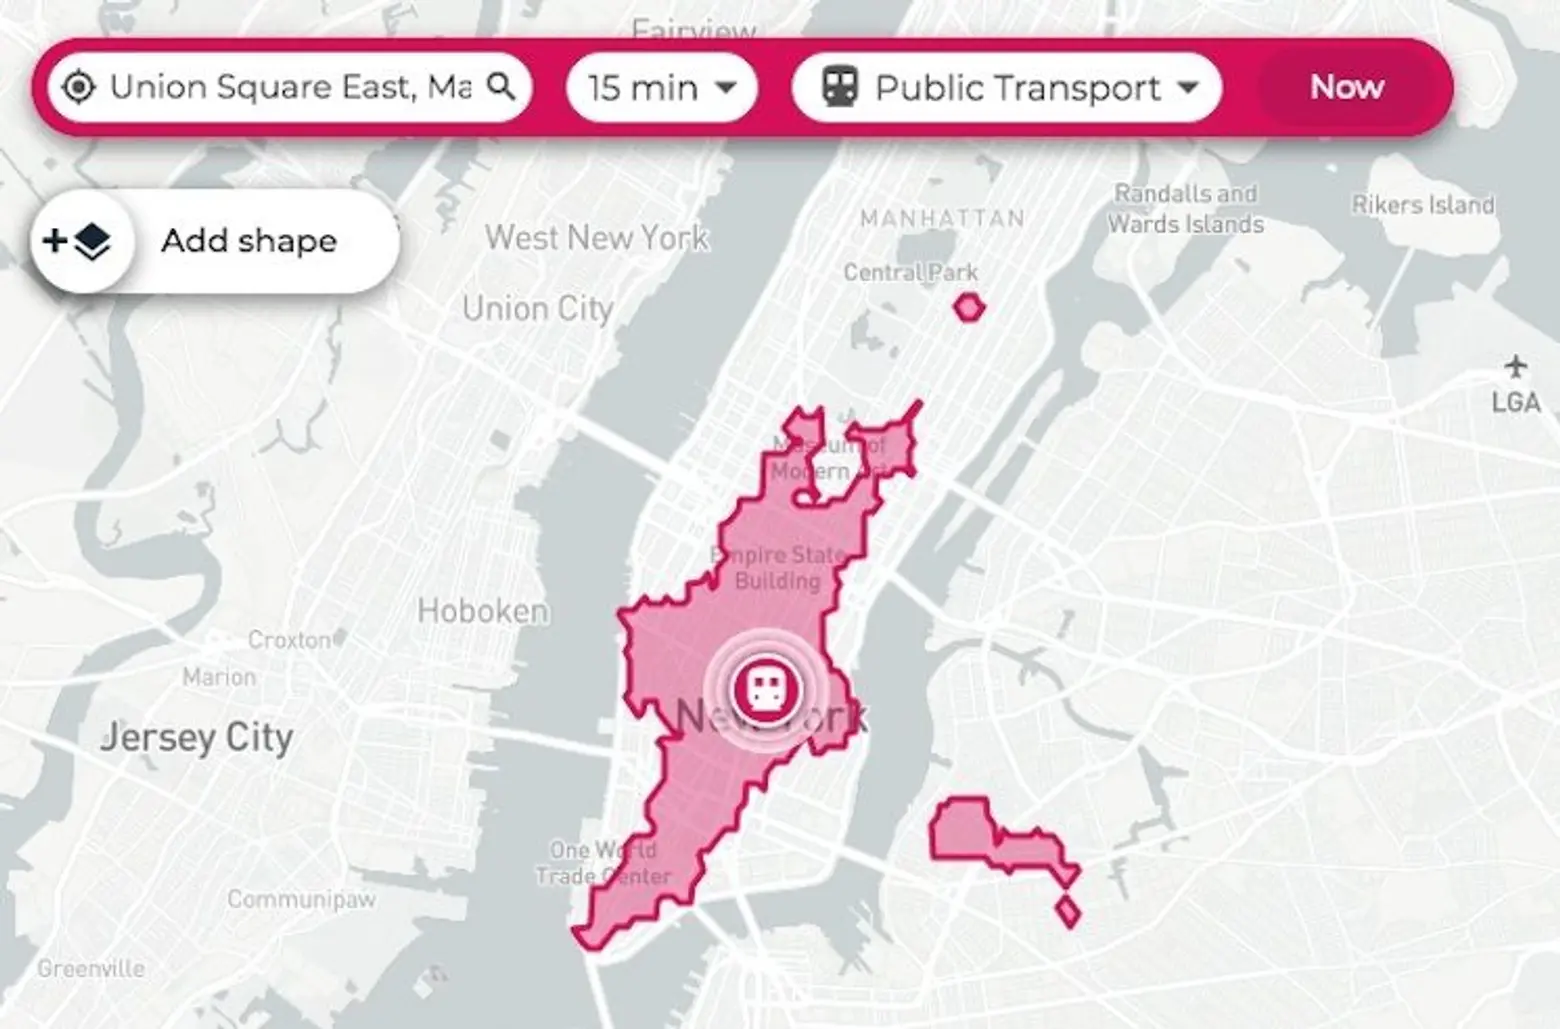 This map tells you how far you can walk, bike, drive or ride public transit in a set amount of time